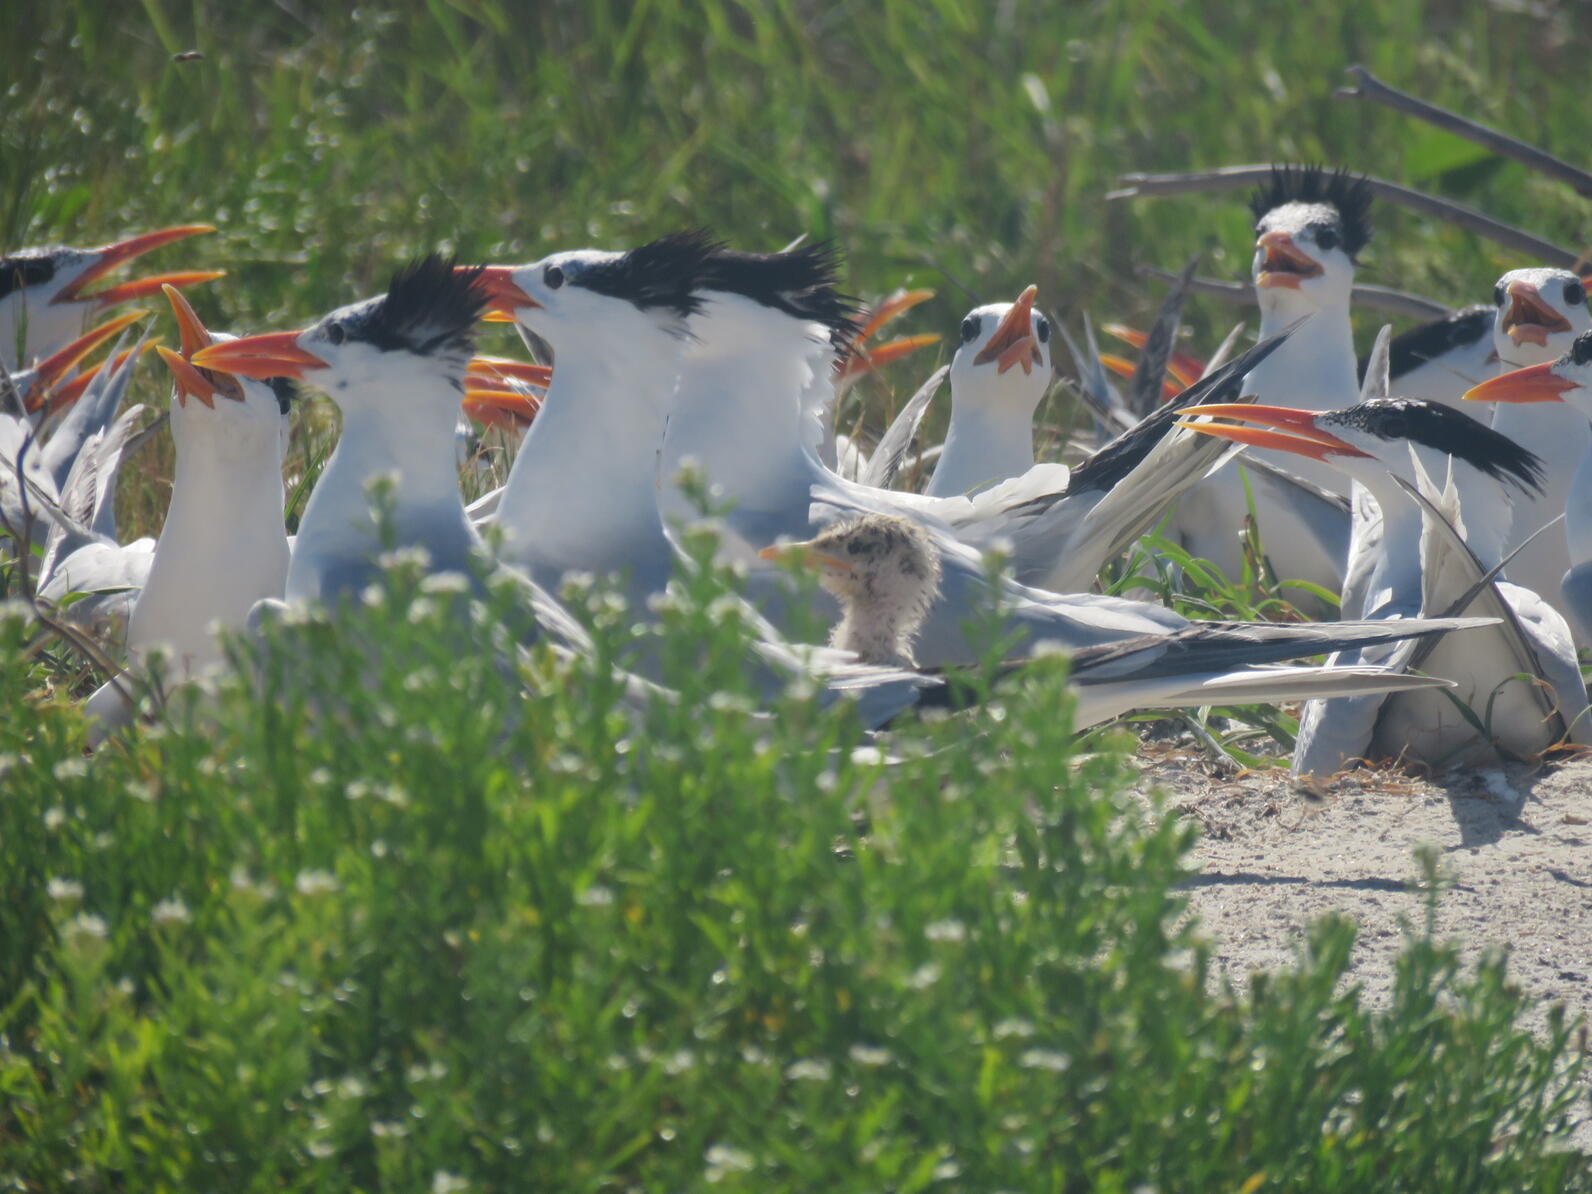 A close up of Royal Terns and their chicks sitting on the beach.